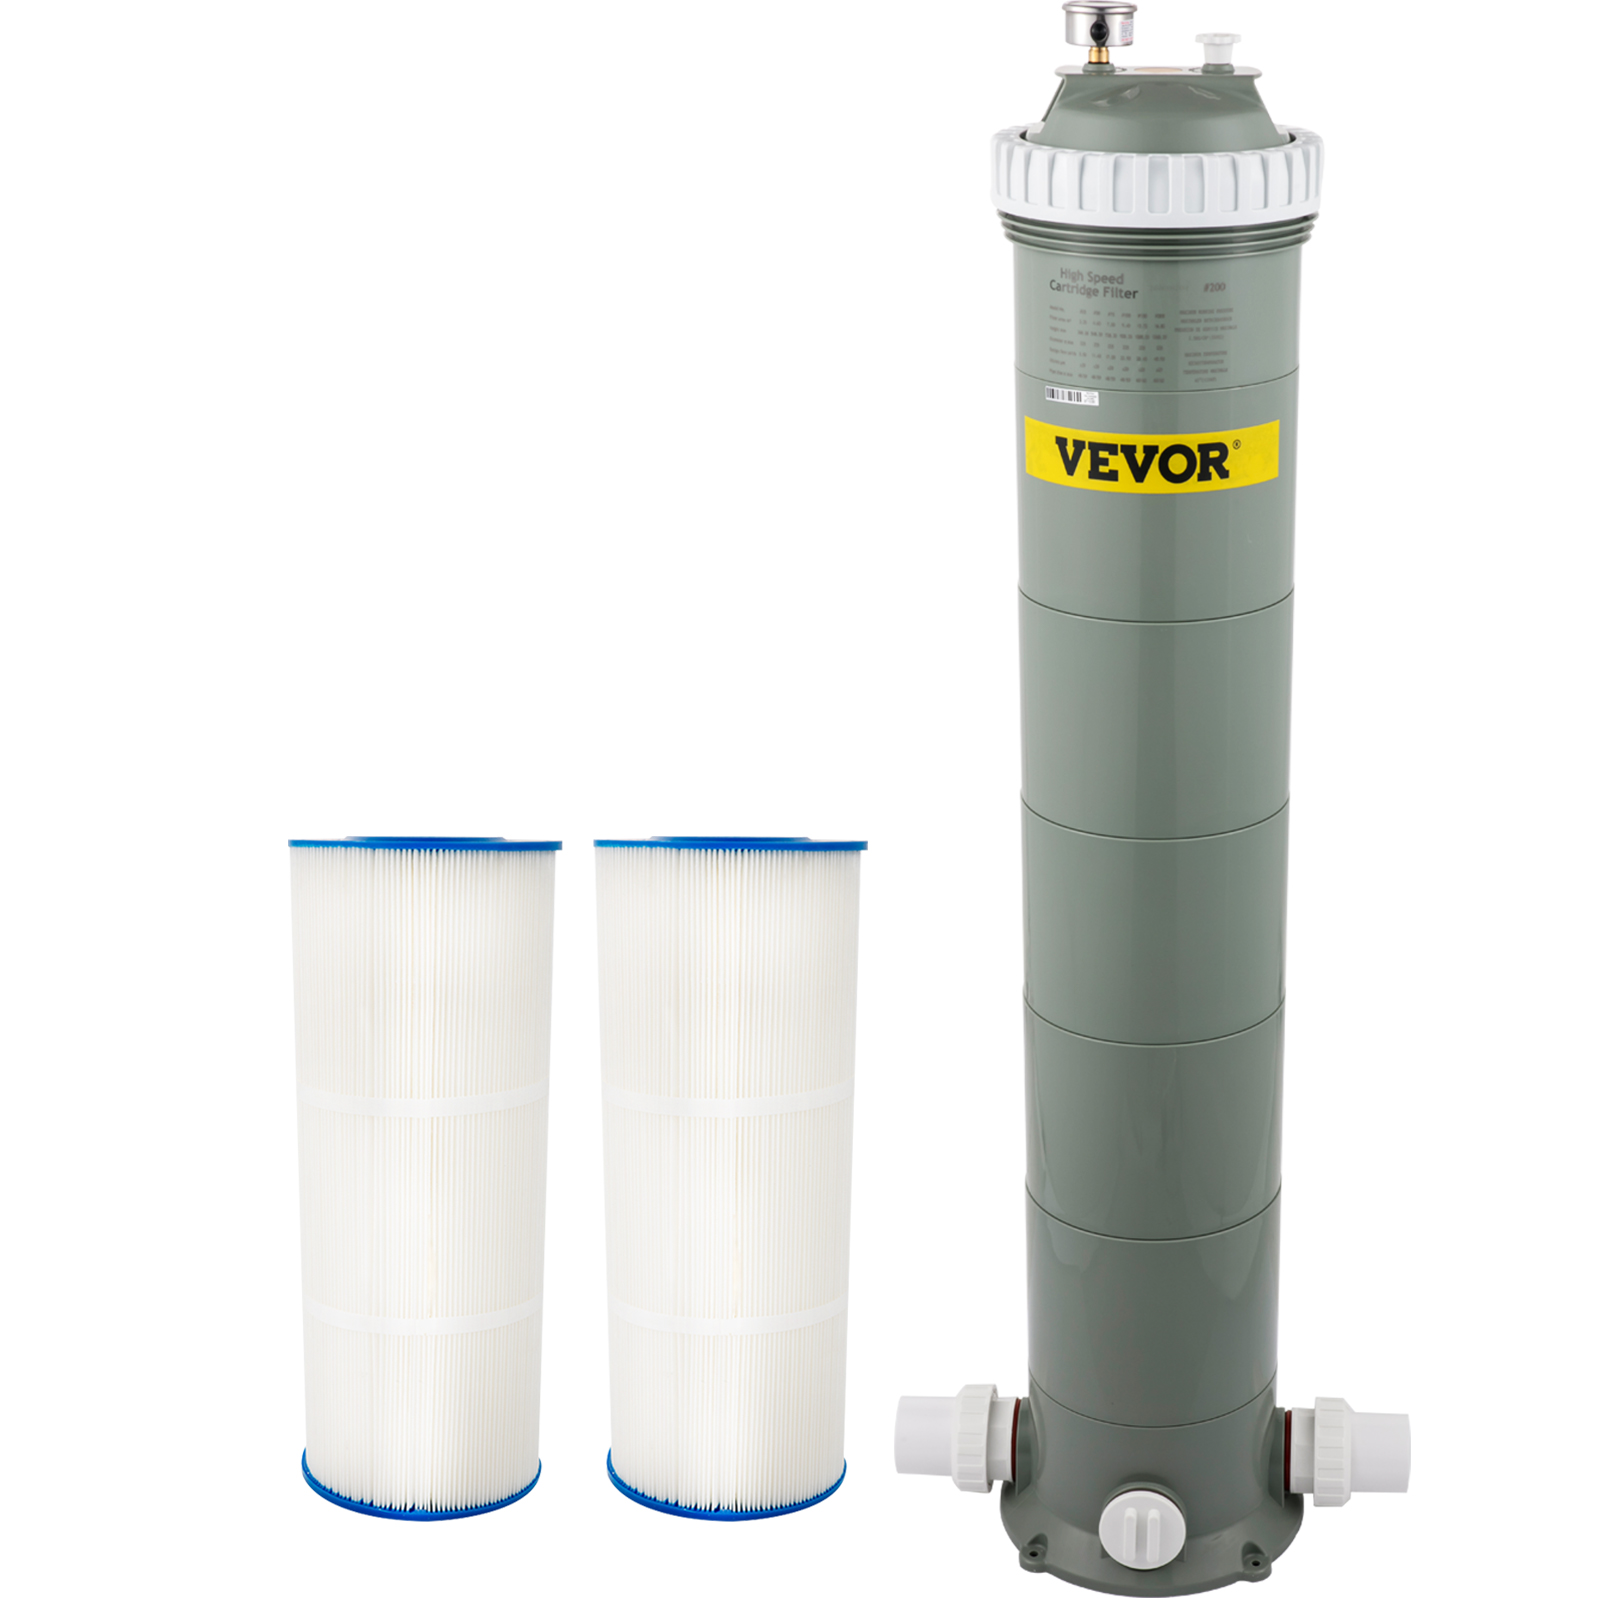 Vevor Pool Cartridge Filter In/above Ground Swimming Pool Filter 194sq.ft Filter от Vevor Many GEOs